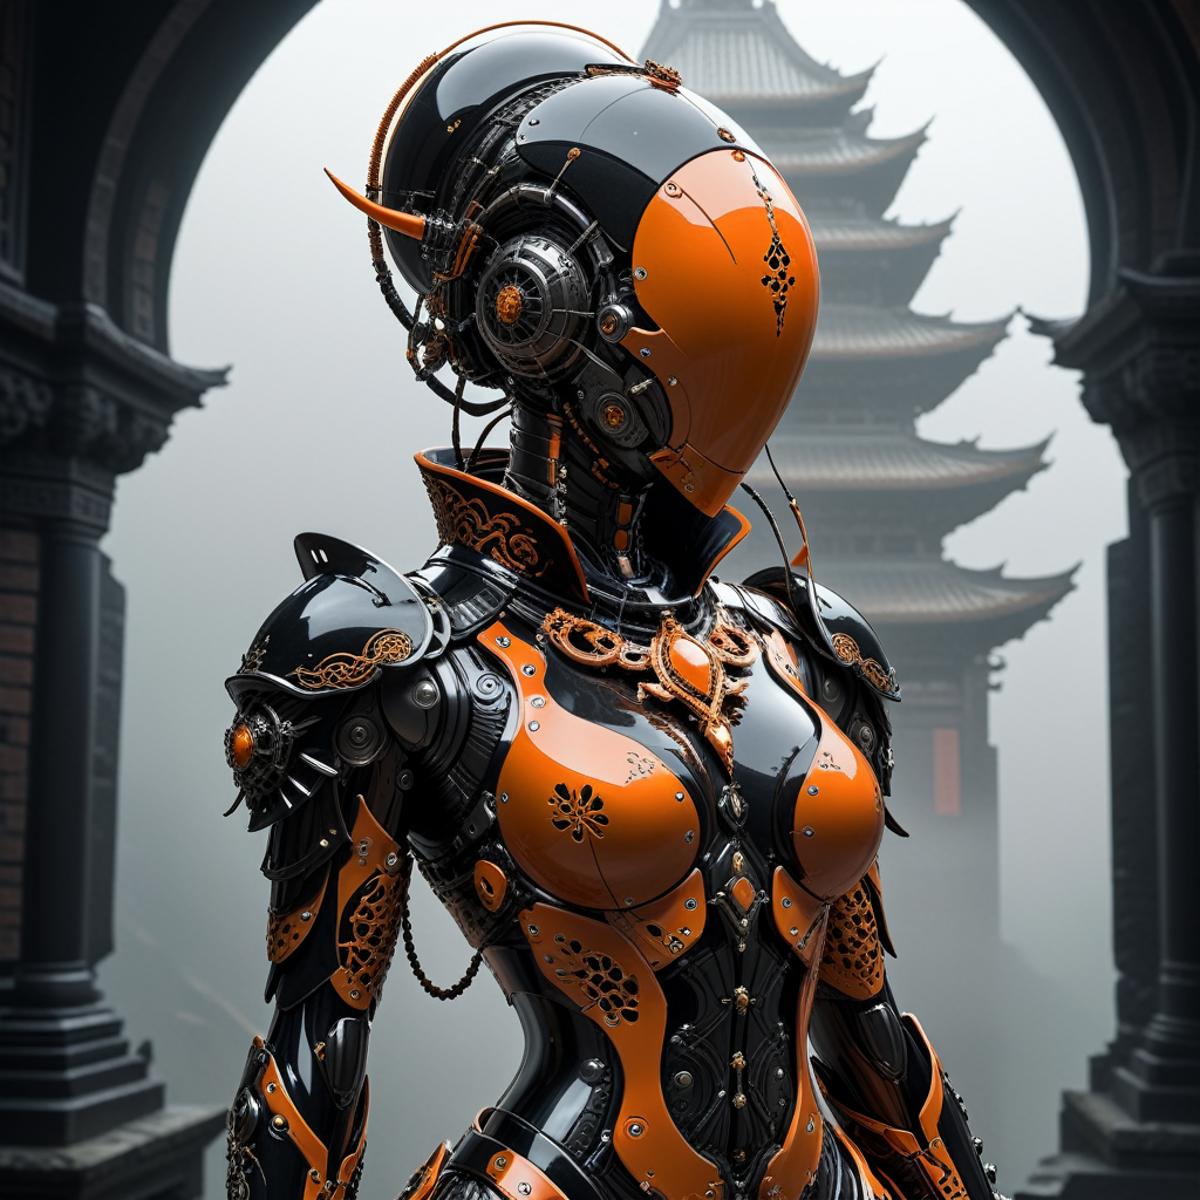 Futuristic Robot Woman in Orange and Black Dress with Necklace and Earrings.